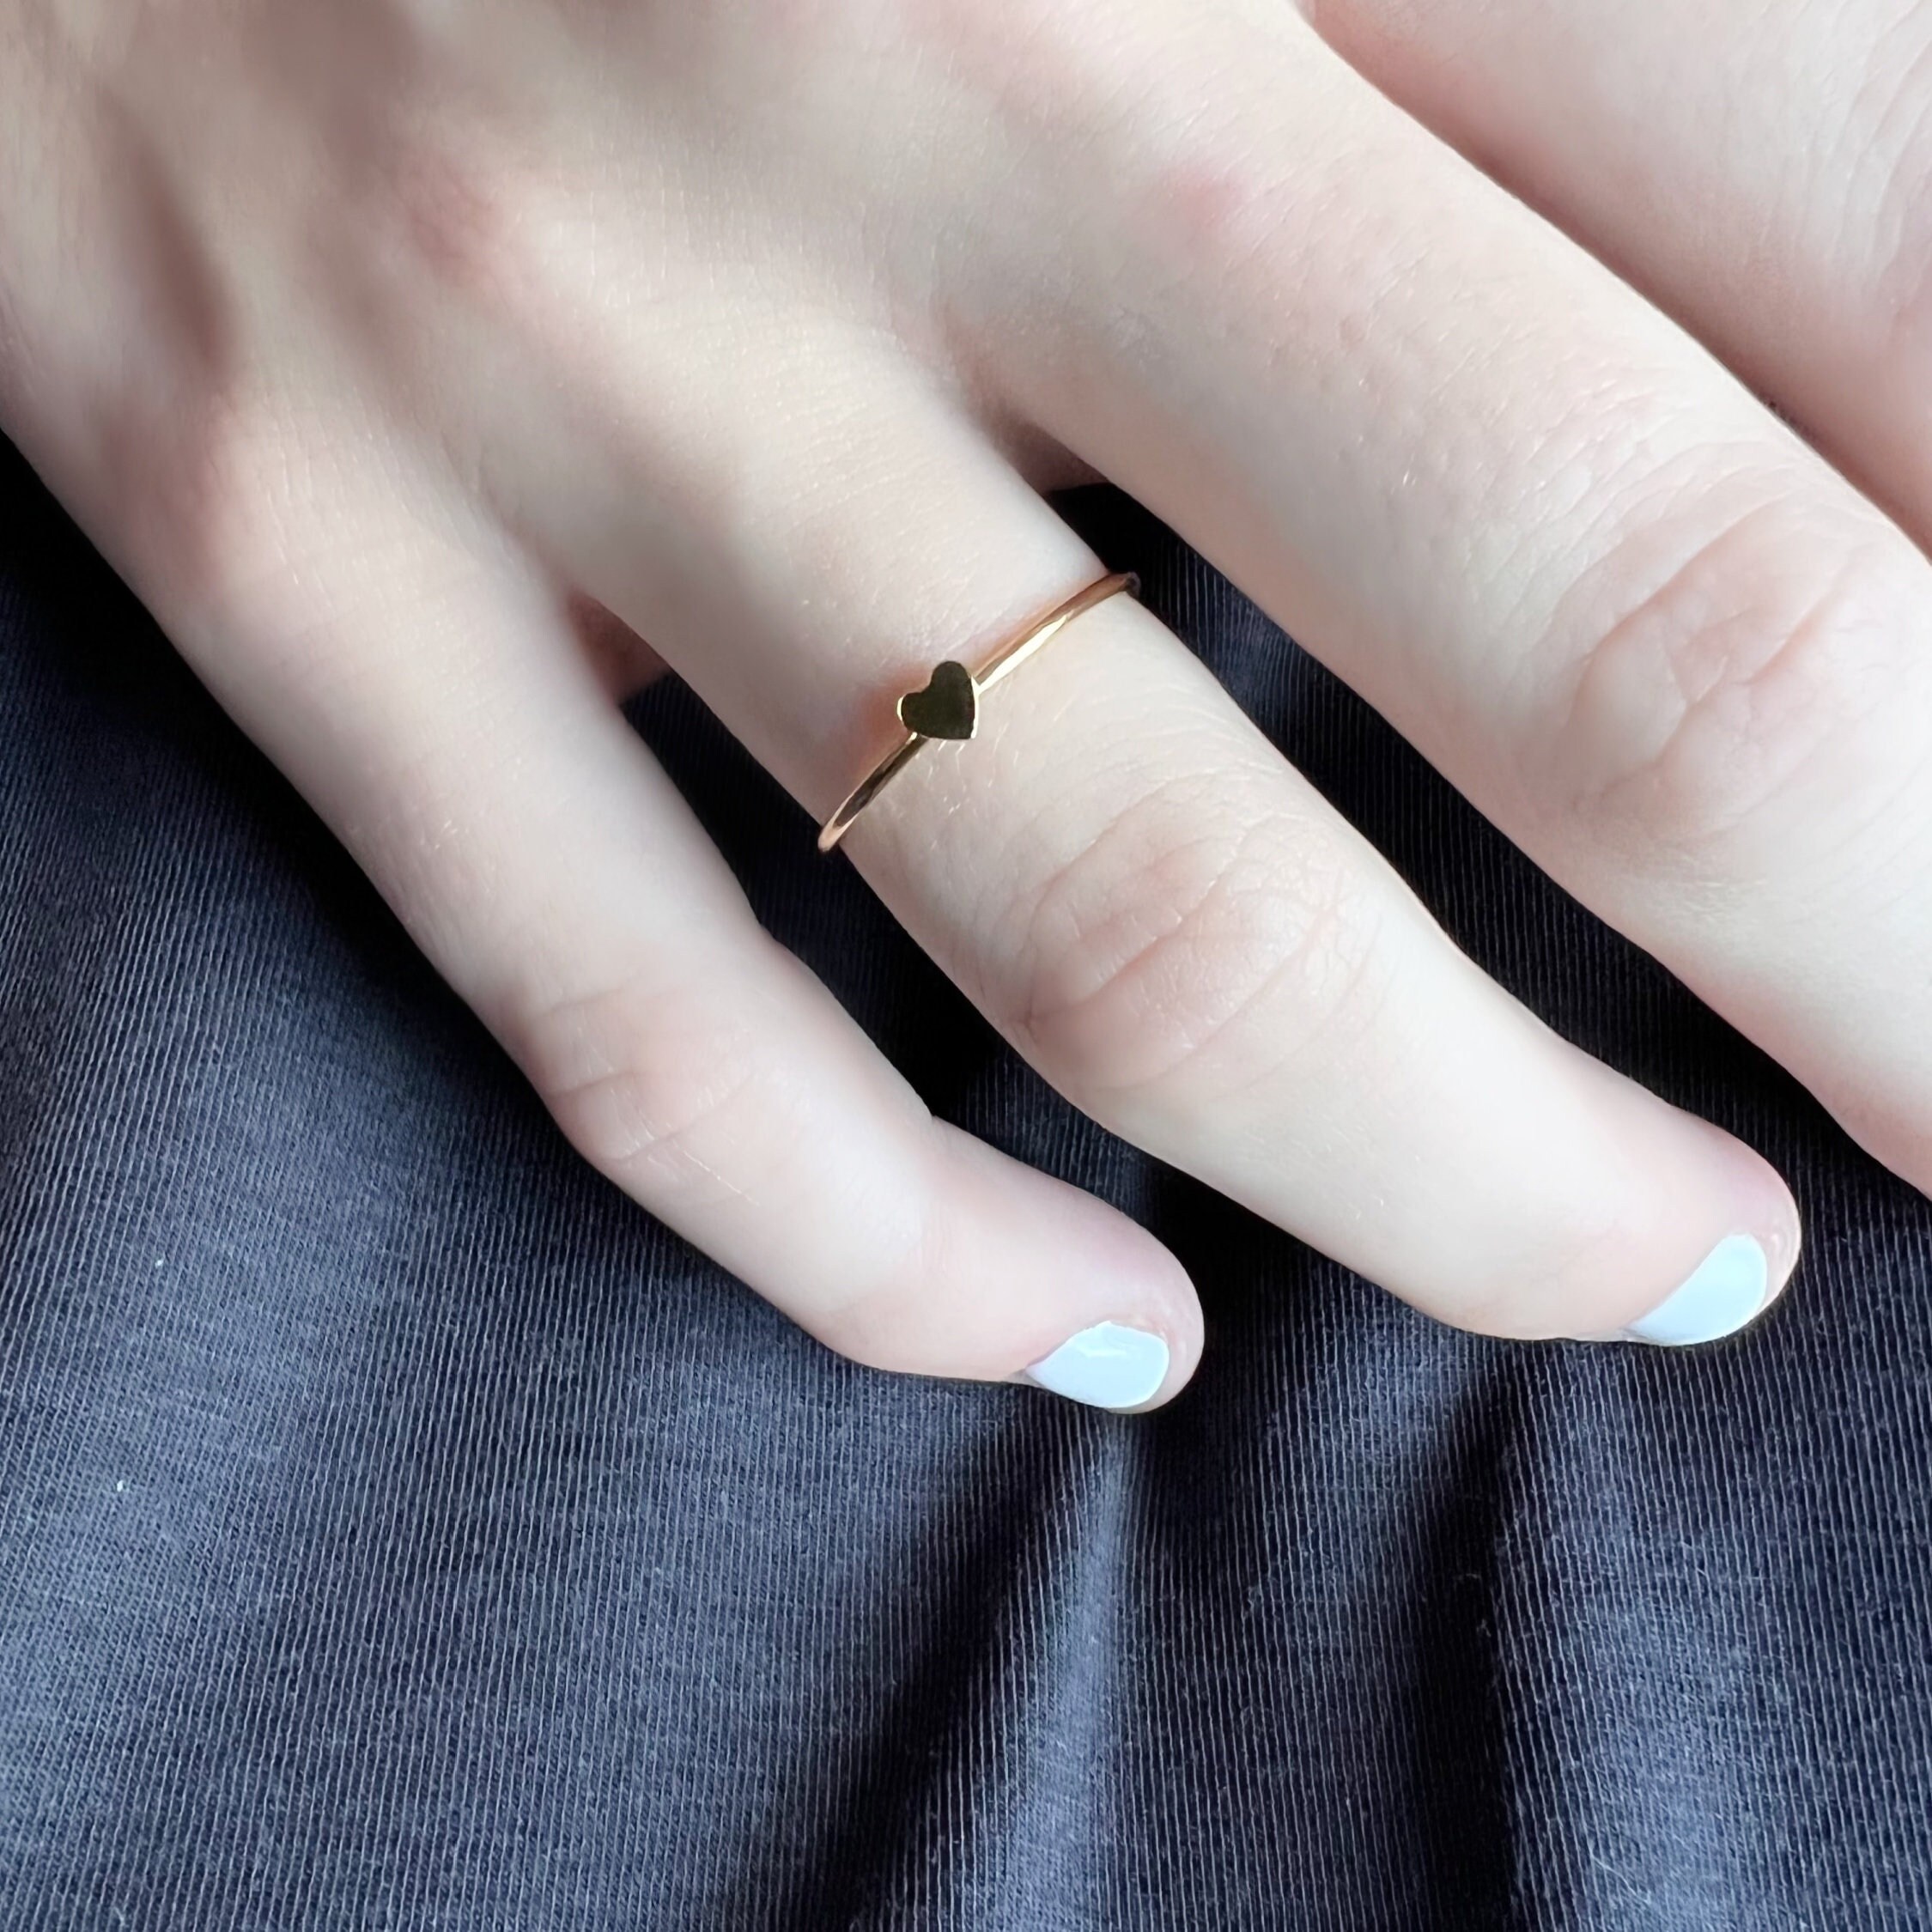 Heart Ring, Love Ring, Gold Ring, Dainty Ring, Bridesmaid Gifts, Cz Ring,  Gift for Her, Thin Ring, Statement Ring, HARLOW RING 